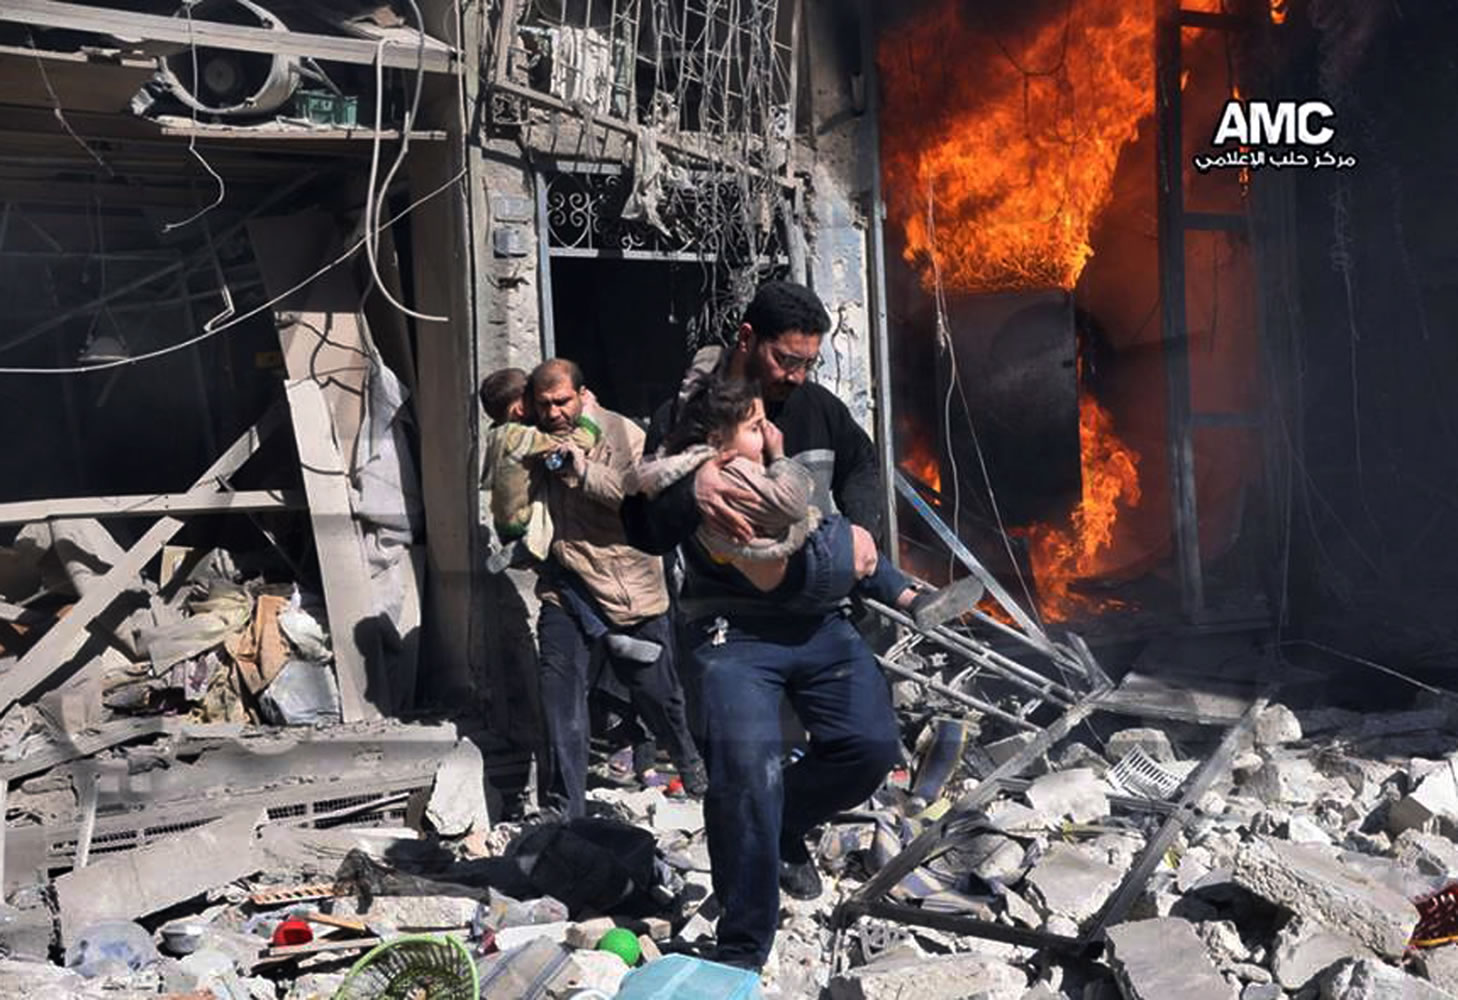 Syrian men help survivors out of a destroyed building after a Syrian forces warplane's attack Saturday in the northern city of Aleppo, Syria. Syrian military aircraft dropped barrel bombs on rebel-held areas.